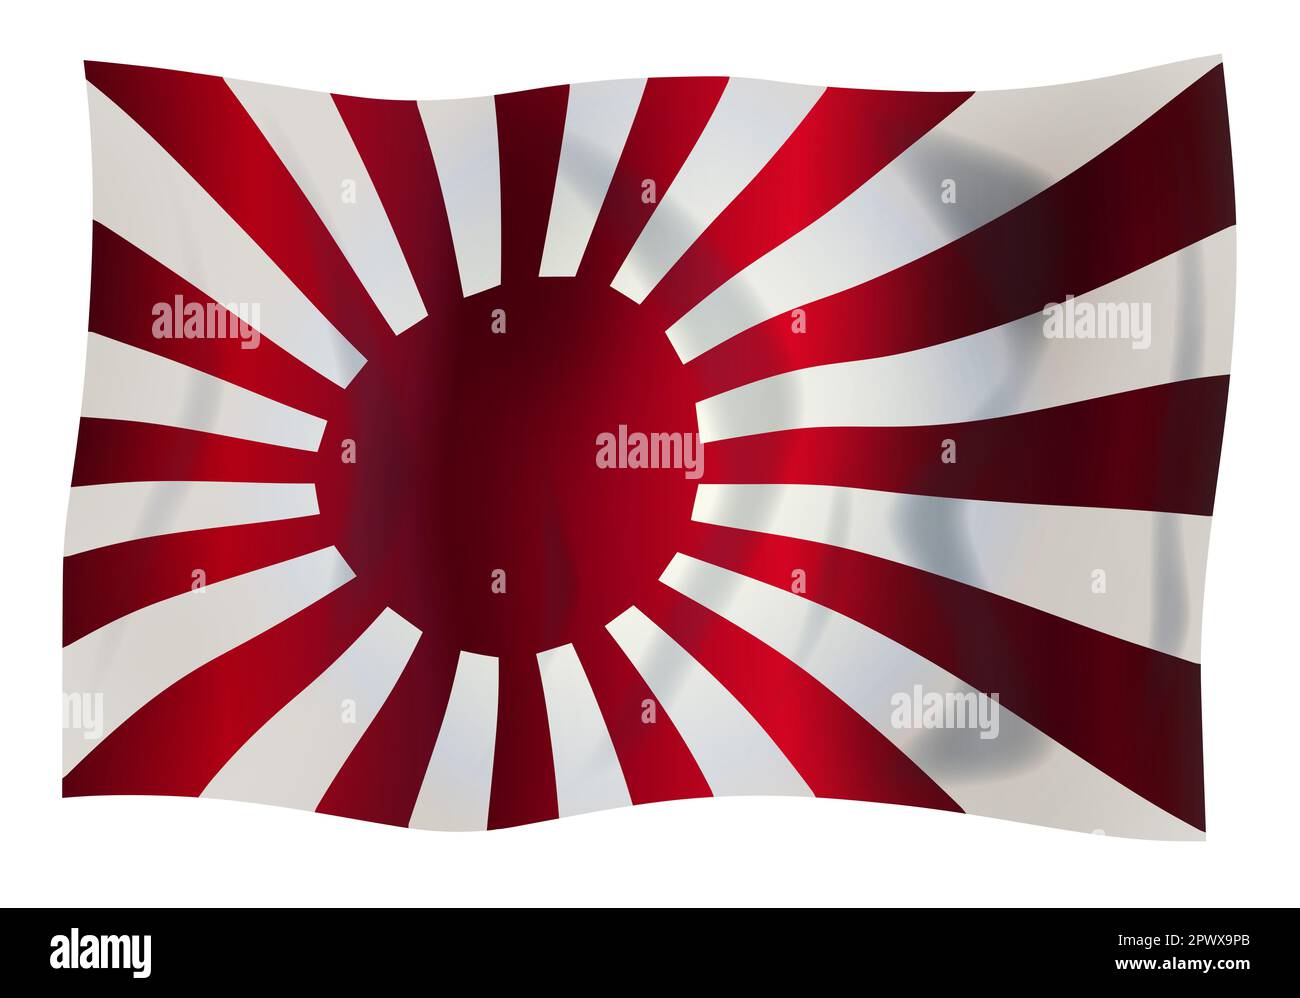 Made in Japan written in Japanese language. Guarantee label with a waving  Japanese flag Stock Photo - Alamy